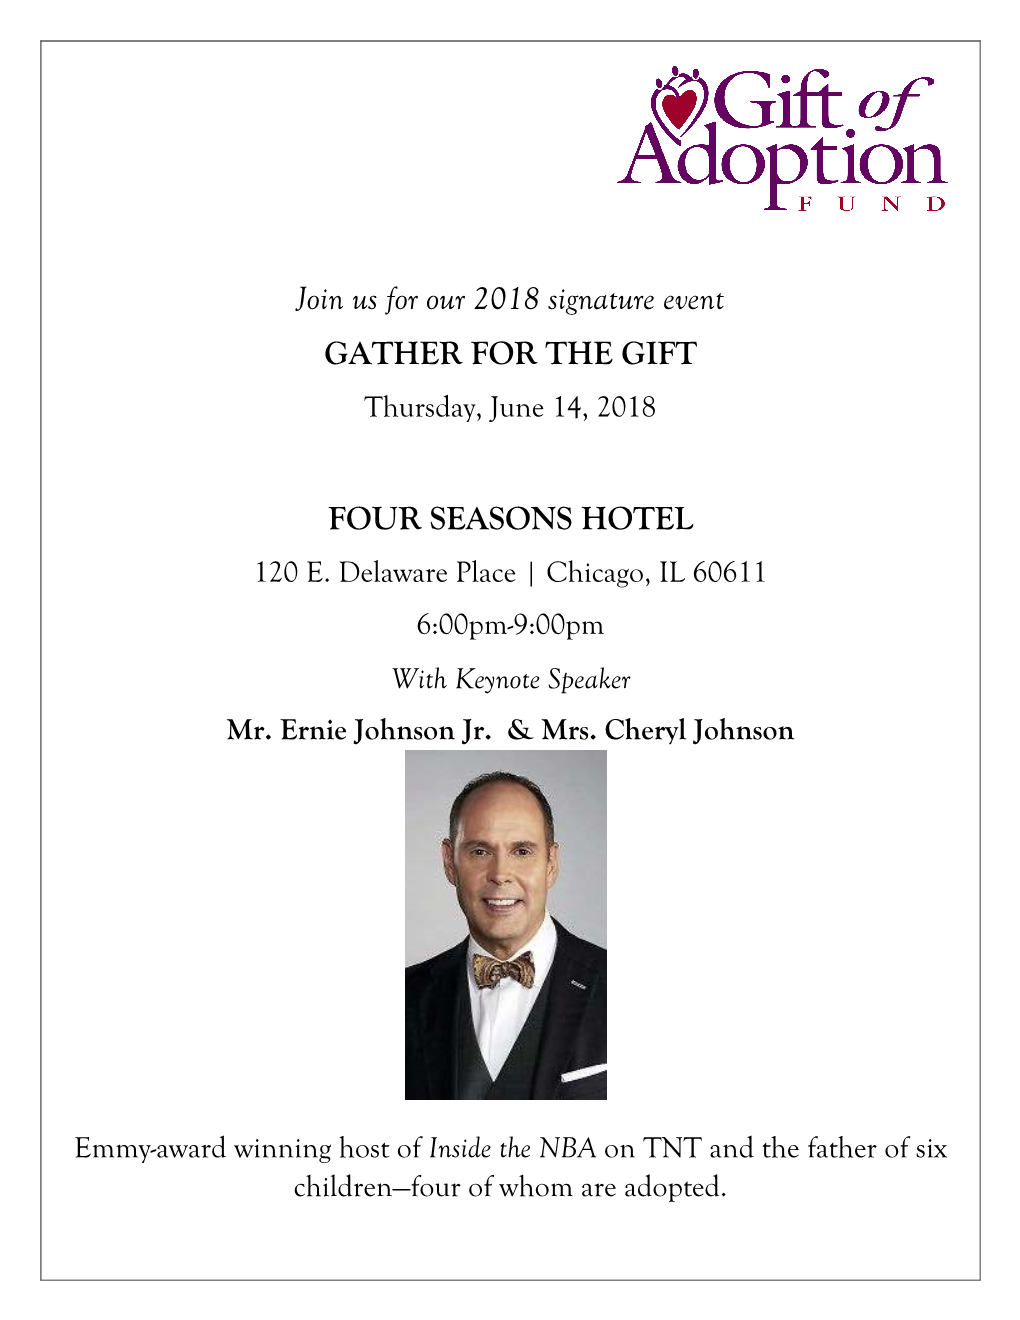 Join Us for Our 2018 Signature Event GATHER for the GIFT FOUR SEASONS HOTEL